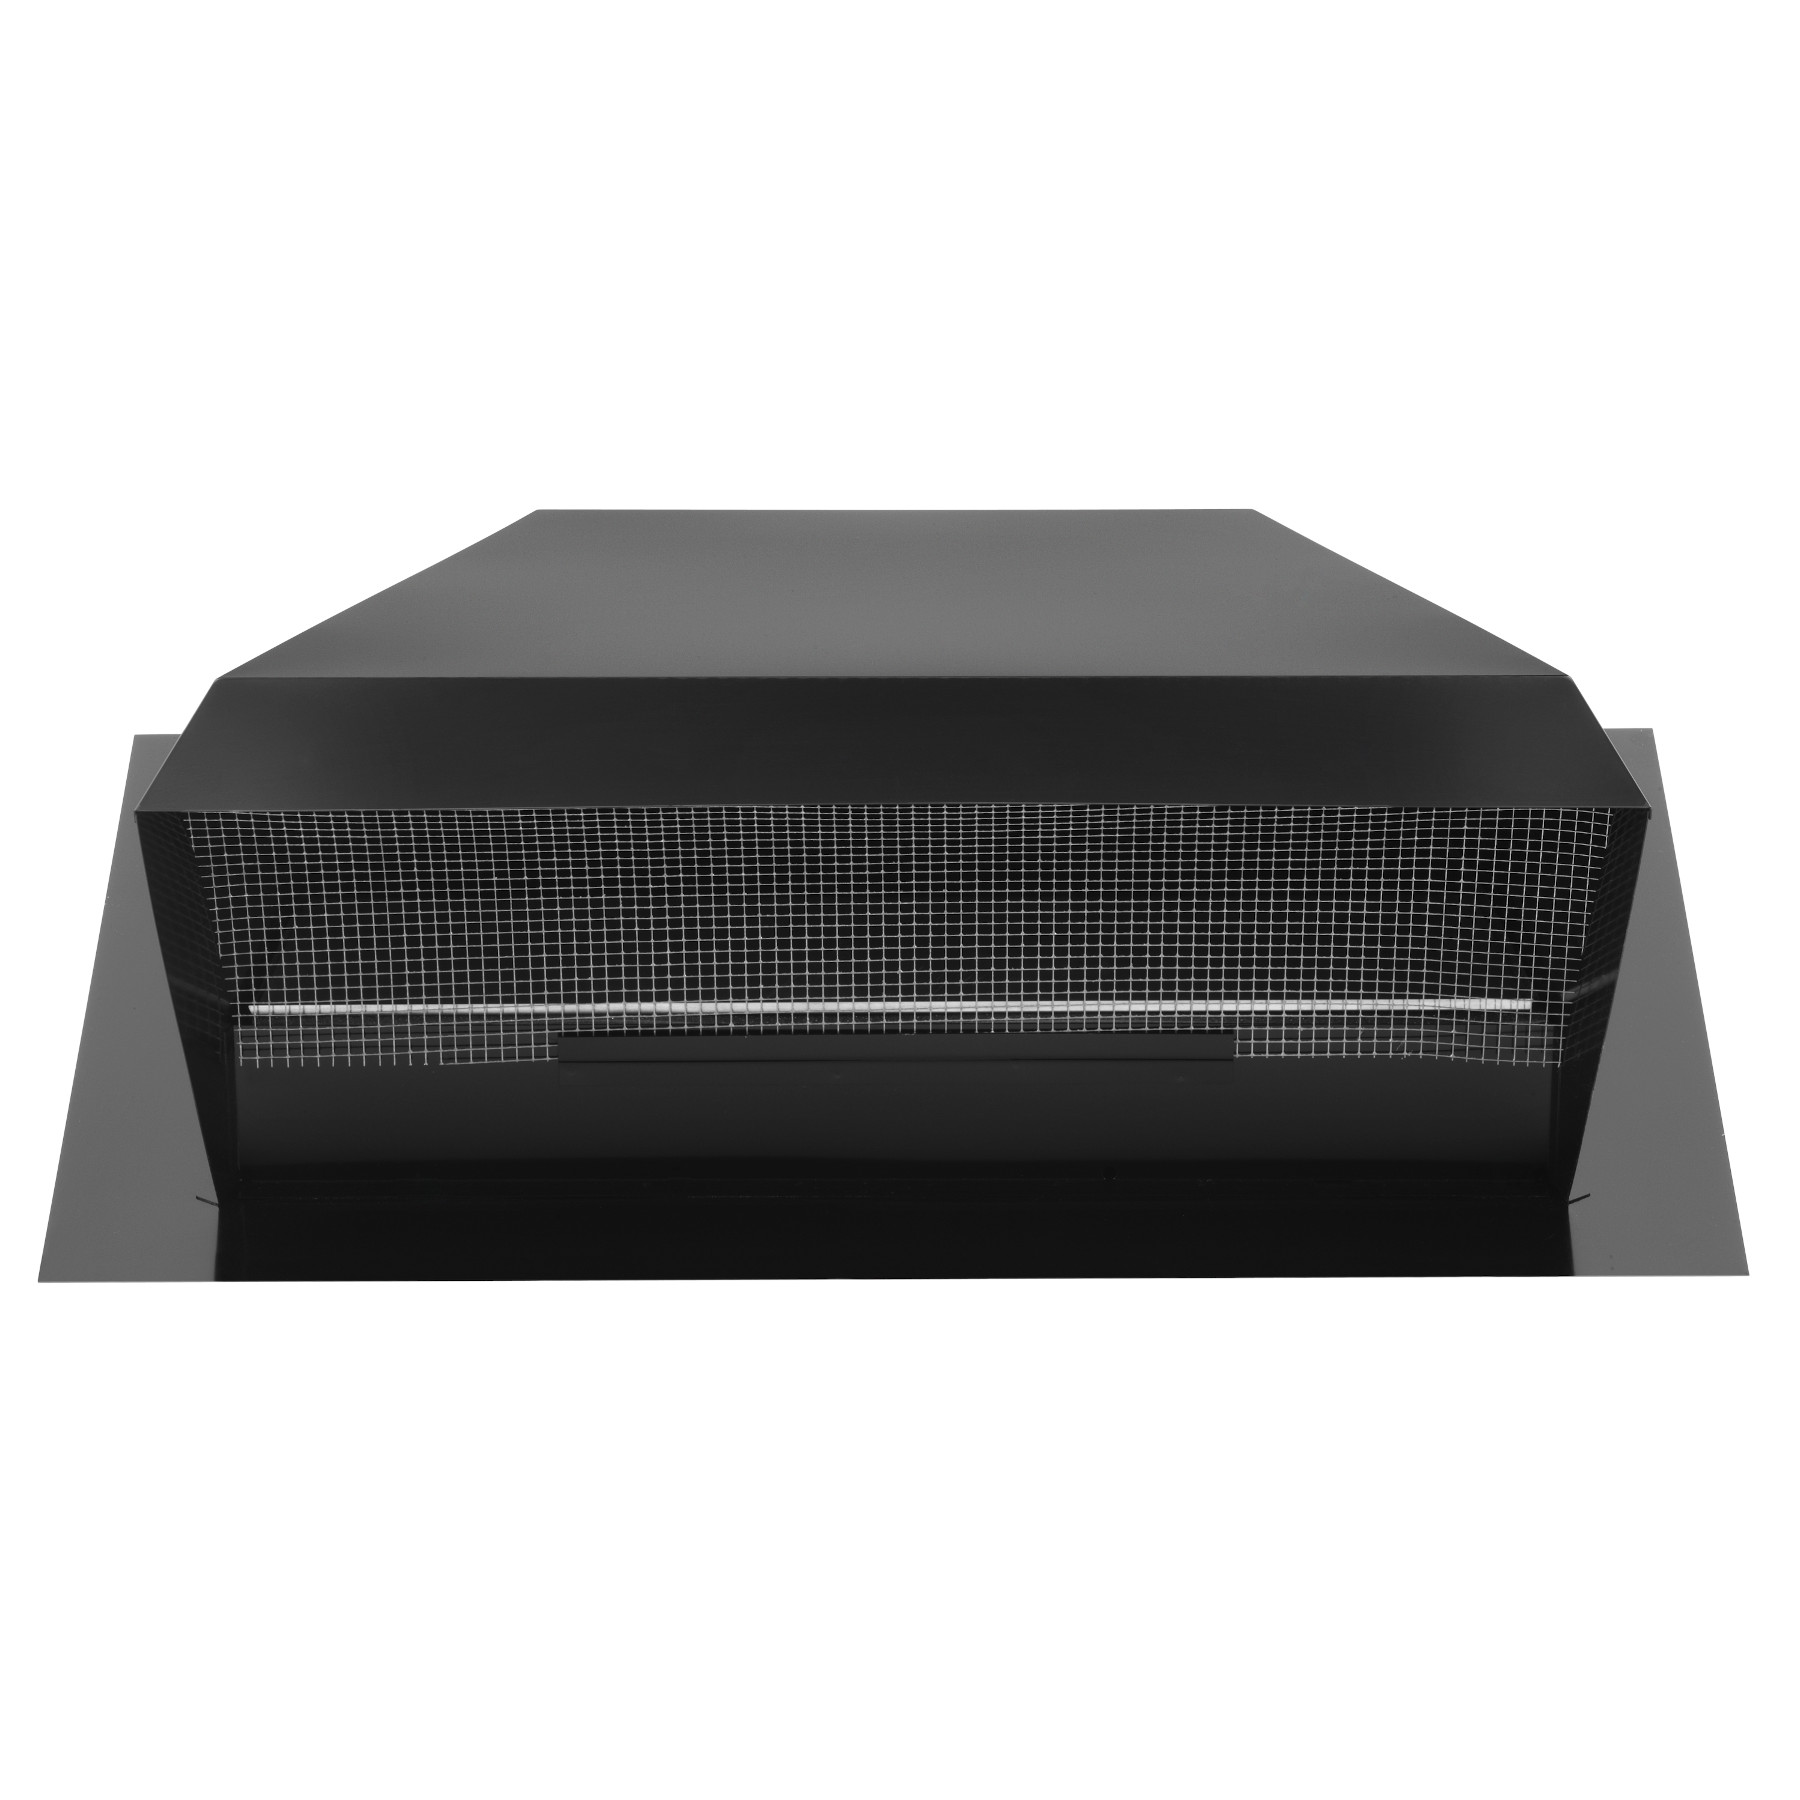 DISCONTINUED: Roof Cap for High Capacity Fans up to 1200 CFM, in Black